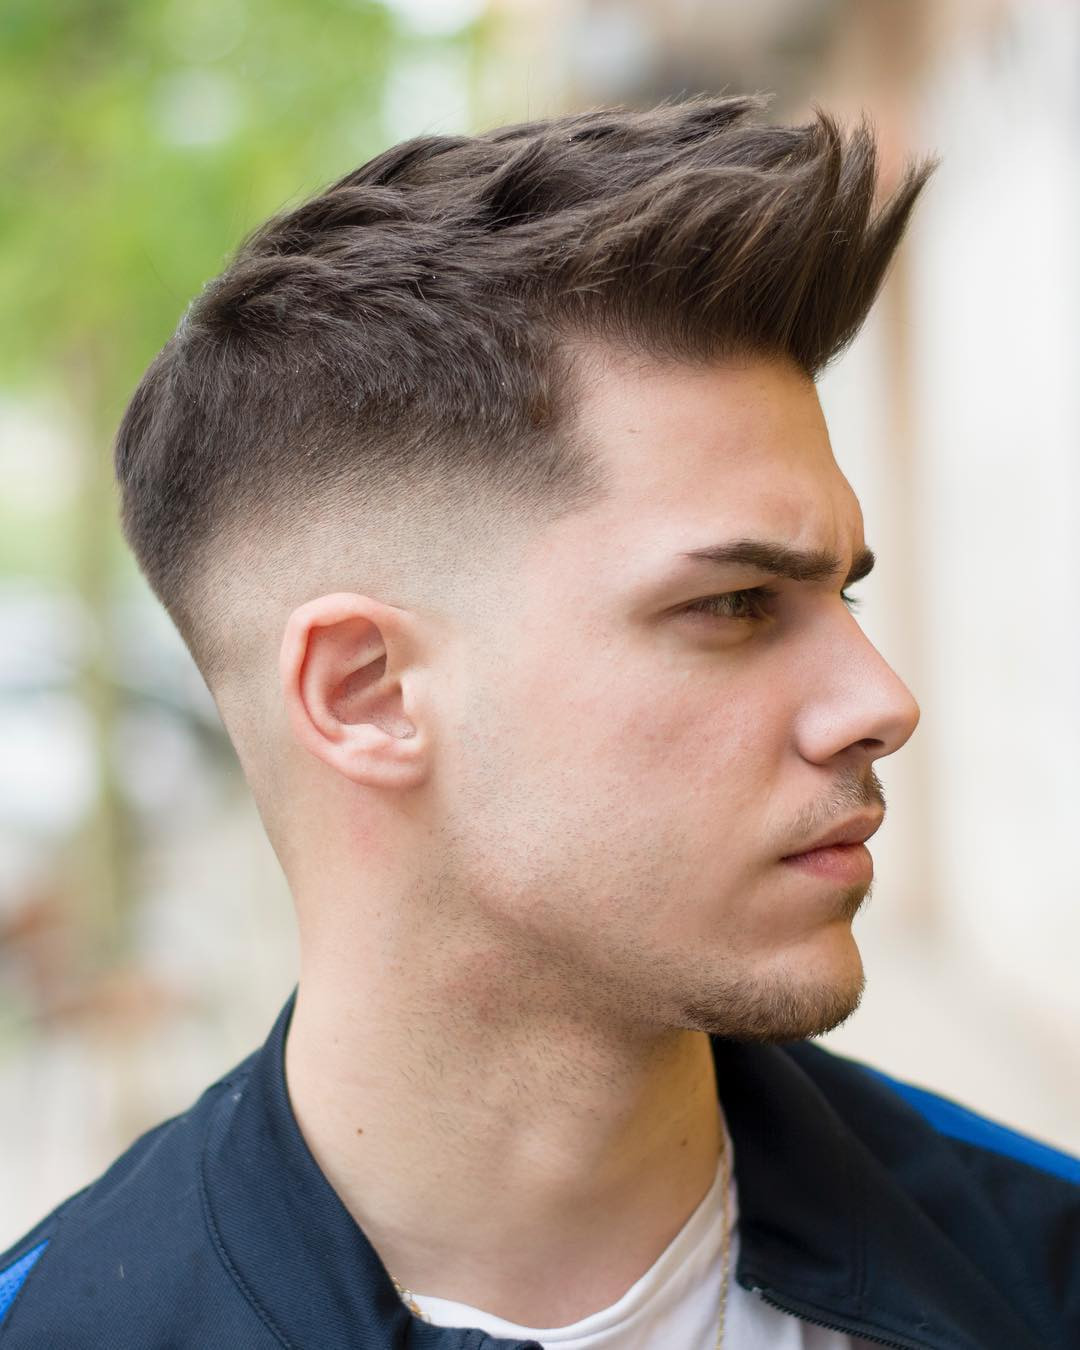 2019 Hairstyles Male
 Best Men s Hairstyles of 2018 New Looks for 2019